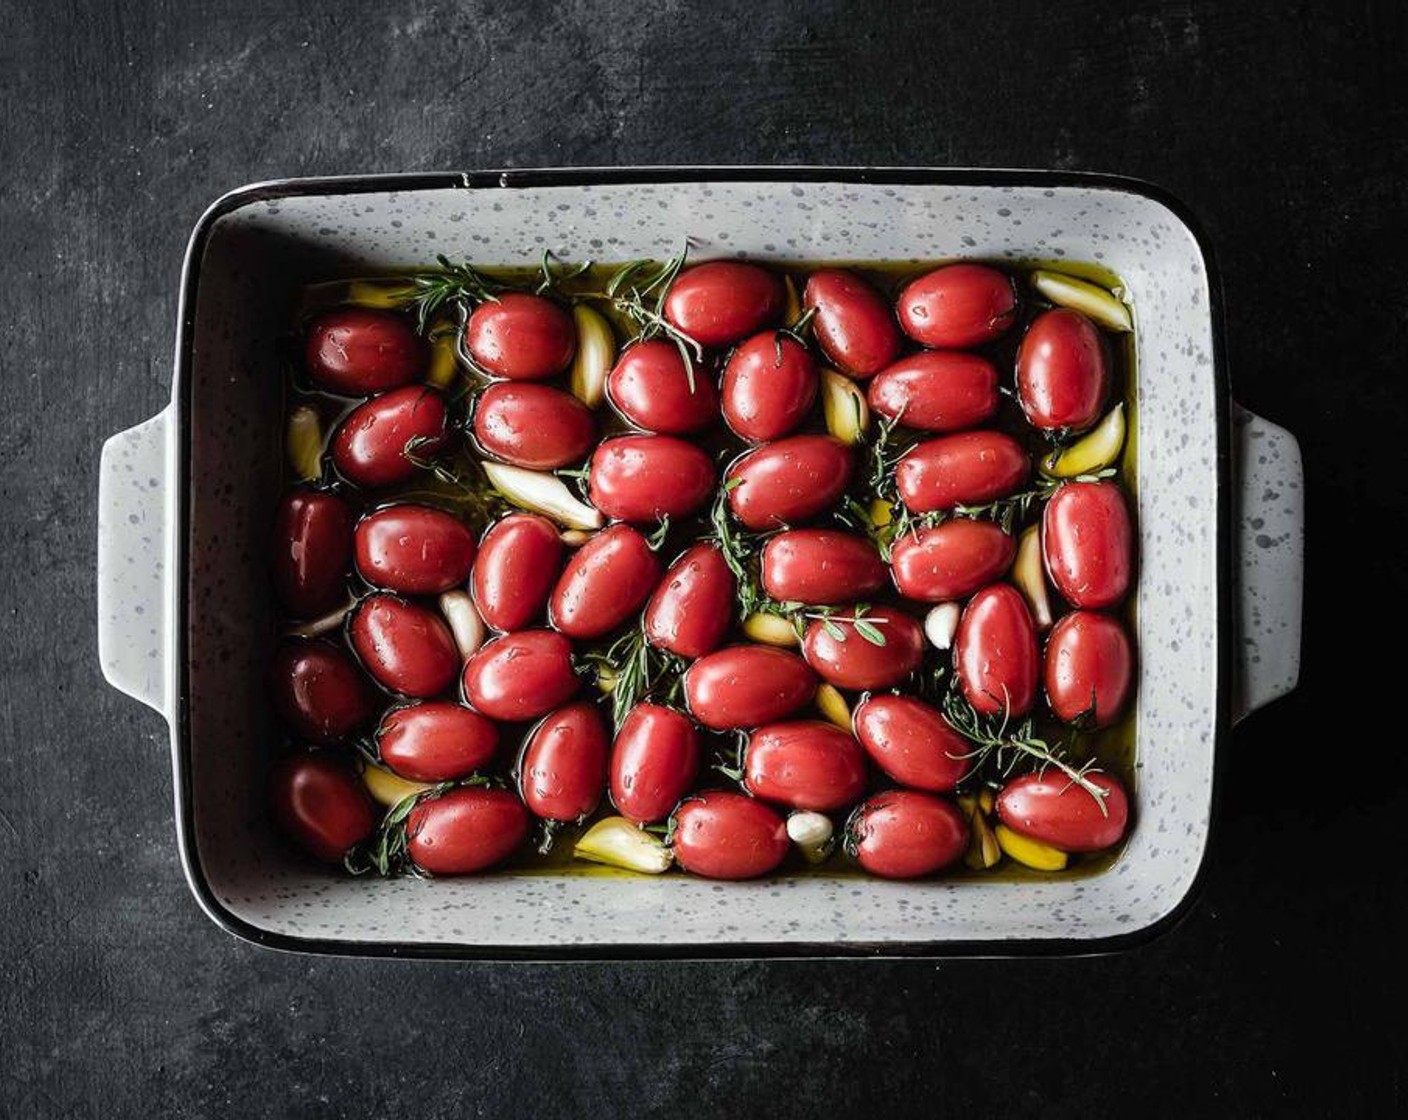 step 2 Fill a baking pan with whole Cherry Tomatoes (3 cups) - add Extra-Virgin Olive Oil (1/2 cup), Garlic (3 cloves), Fresh Rosemary (3 sprigs), and Fresh Thyme (5 sprigs) to the pan and sprinkle the pan contents generously with Salt (to taste).